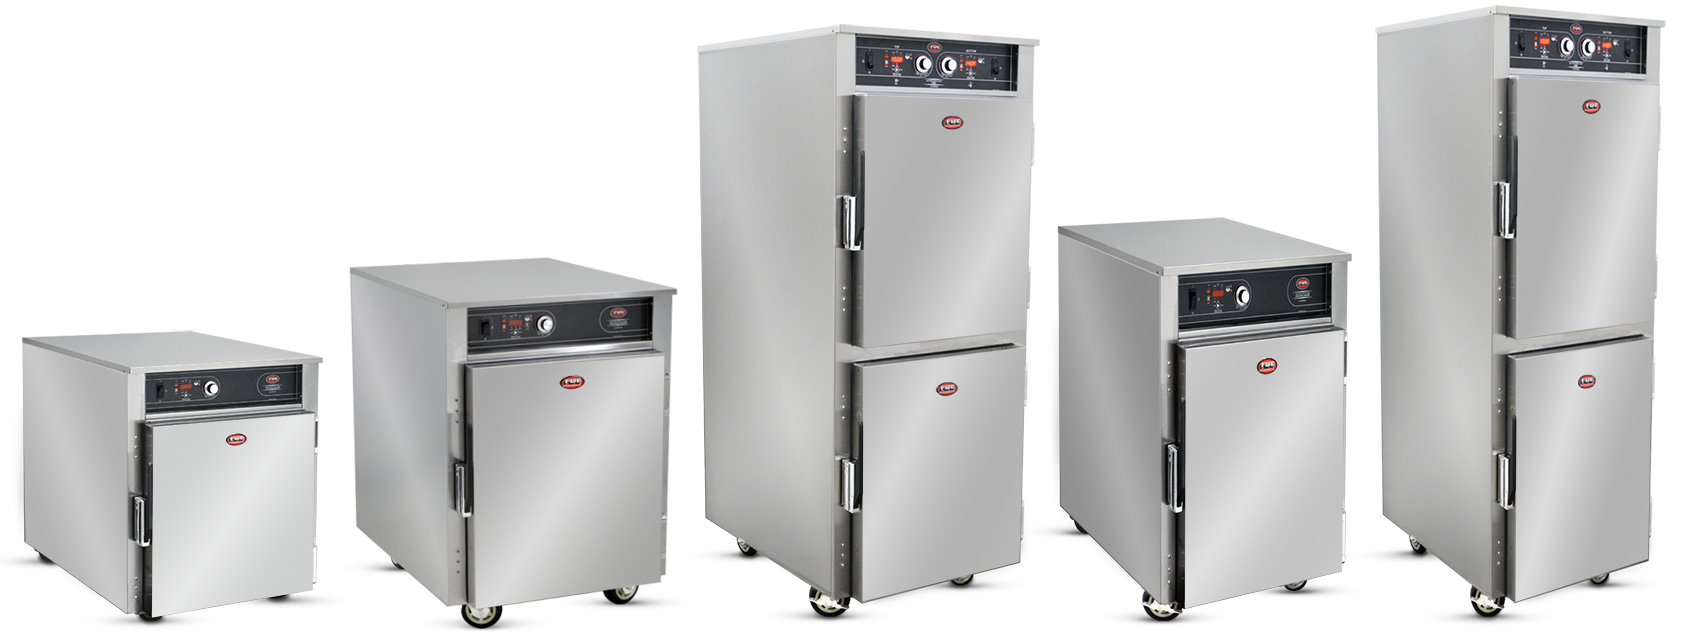 FWE / Food Warming Equipment Company Low Temp Cook & Hold Oven with Smoker Feature Equipment Models